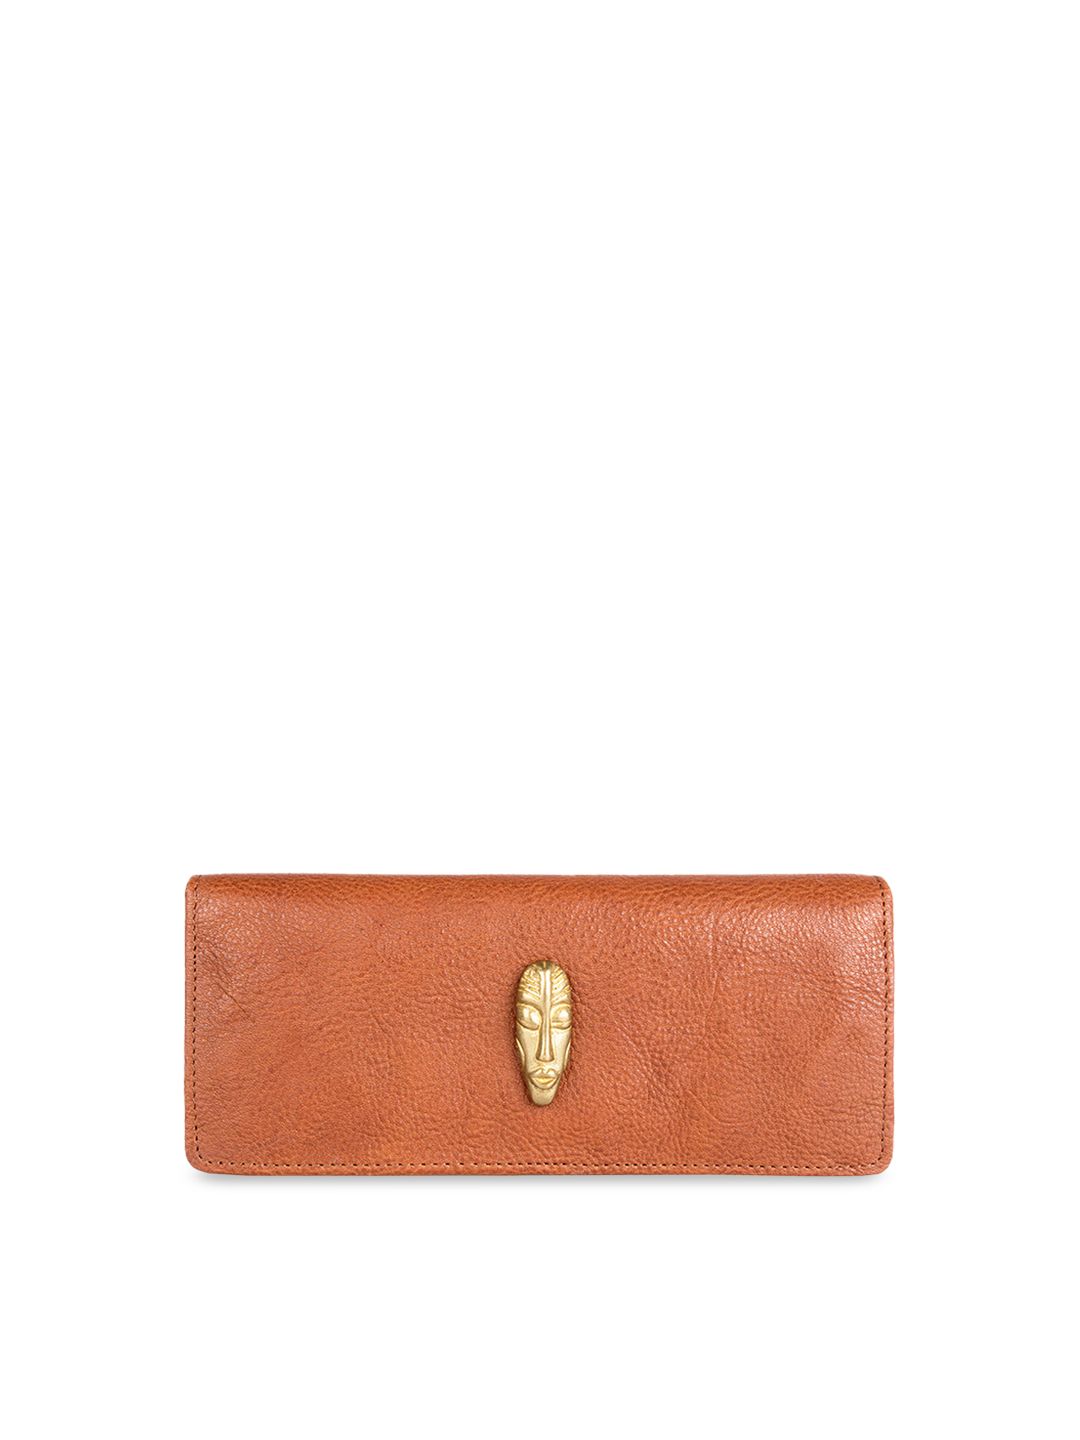 Hidesign Women Tan Brown Solid Leather Two Fold Wallet Price in India